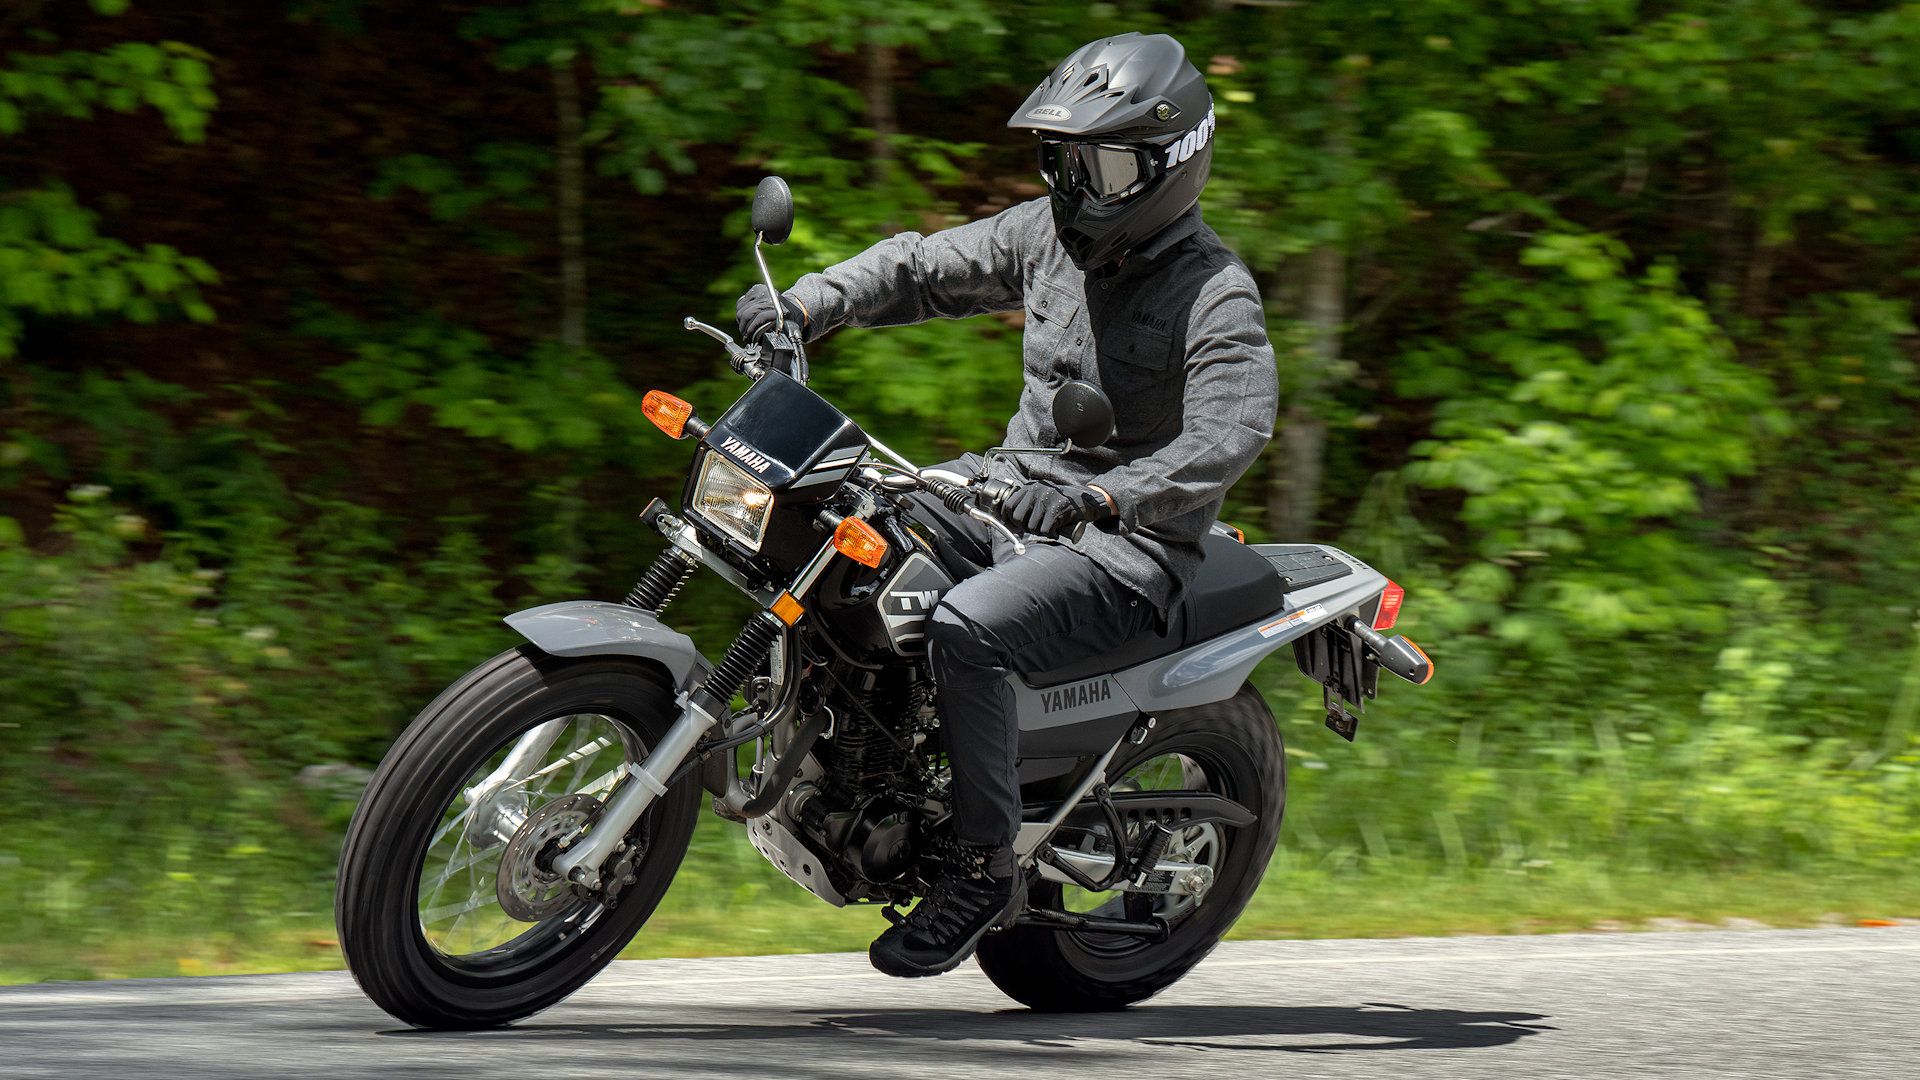 10 Reasons Why The Yamaha TW200 Is A Great Beginner Bike